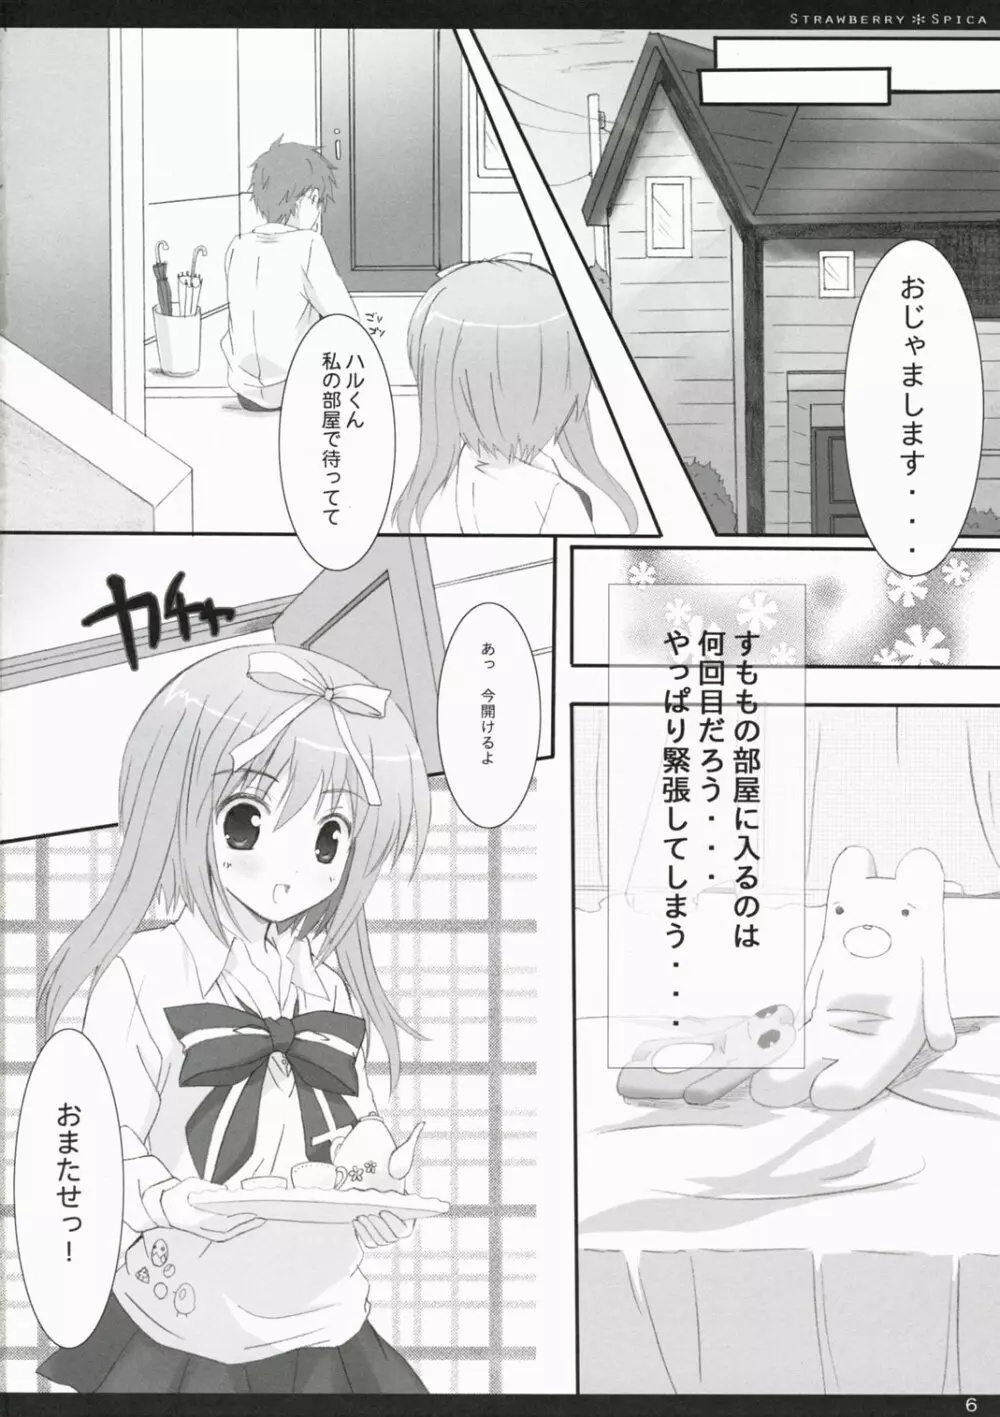 Strawberry Spica Page.5